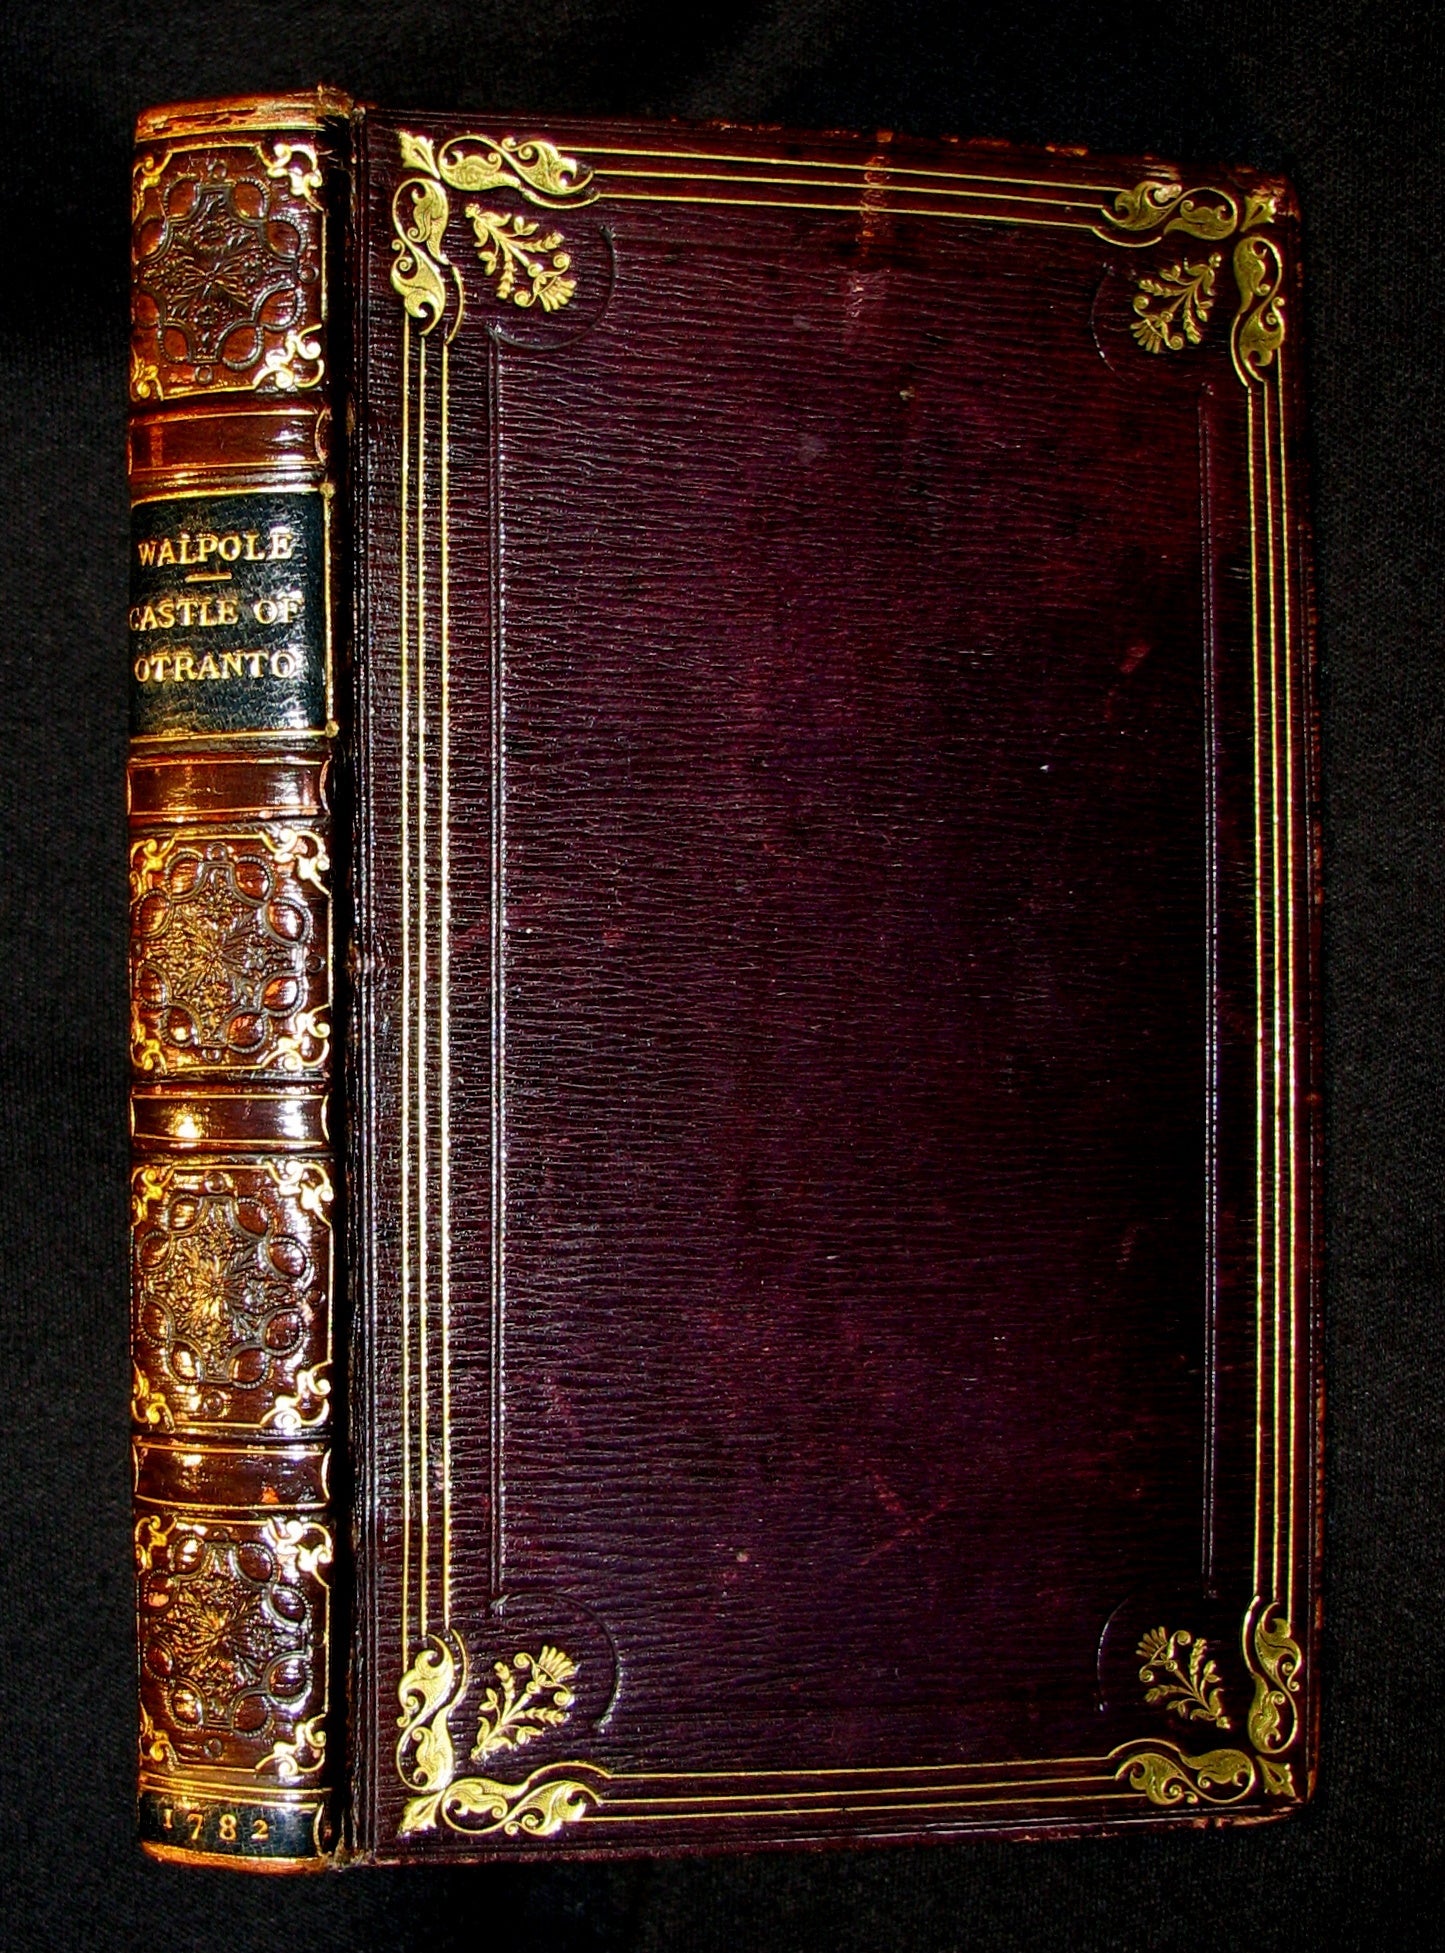 1782 Rare Gothic Book - The Castle of Otranto, a Gothic Story by Horace Walpole